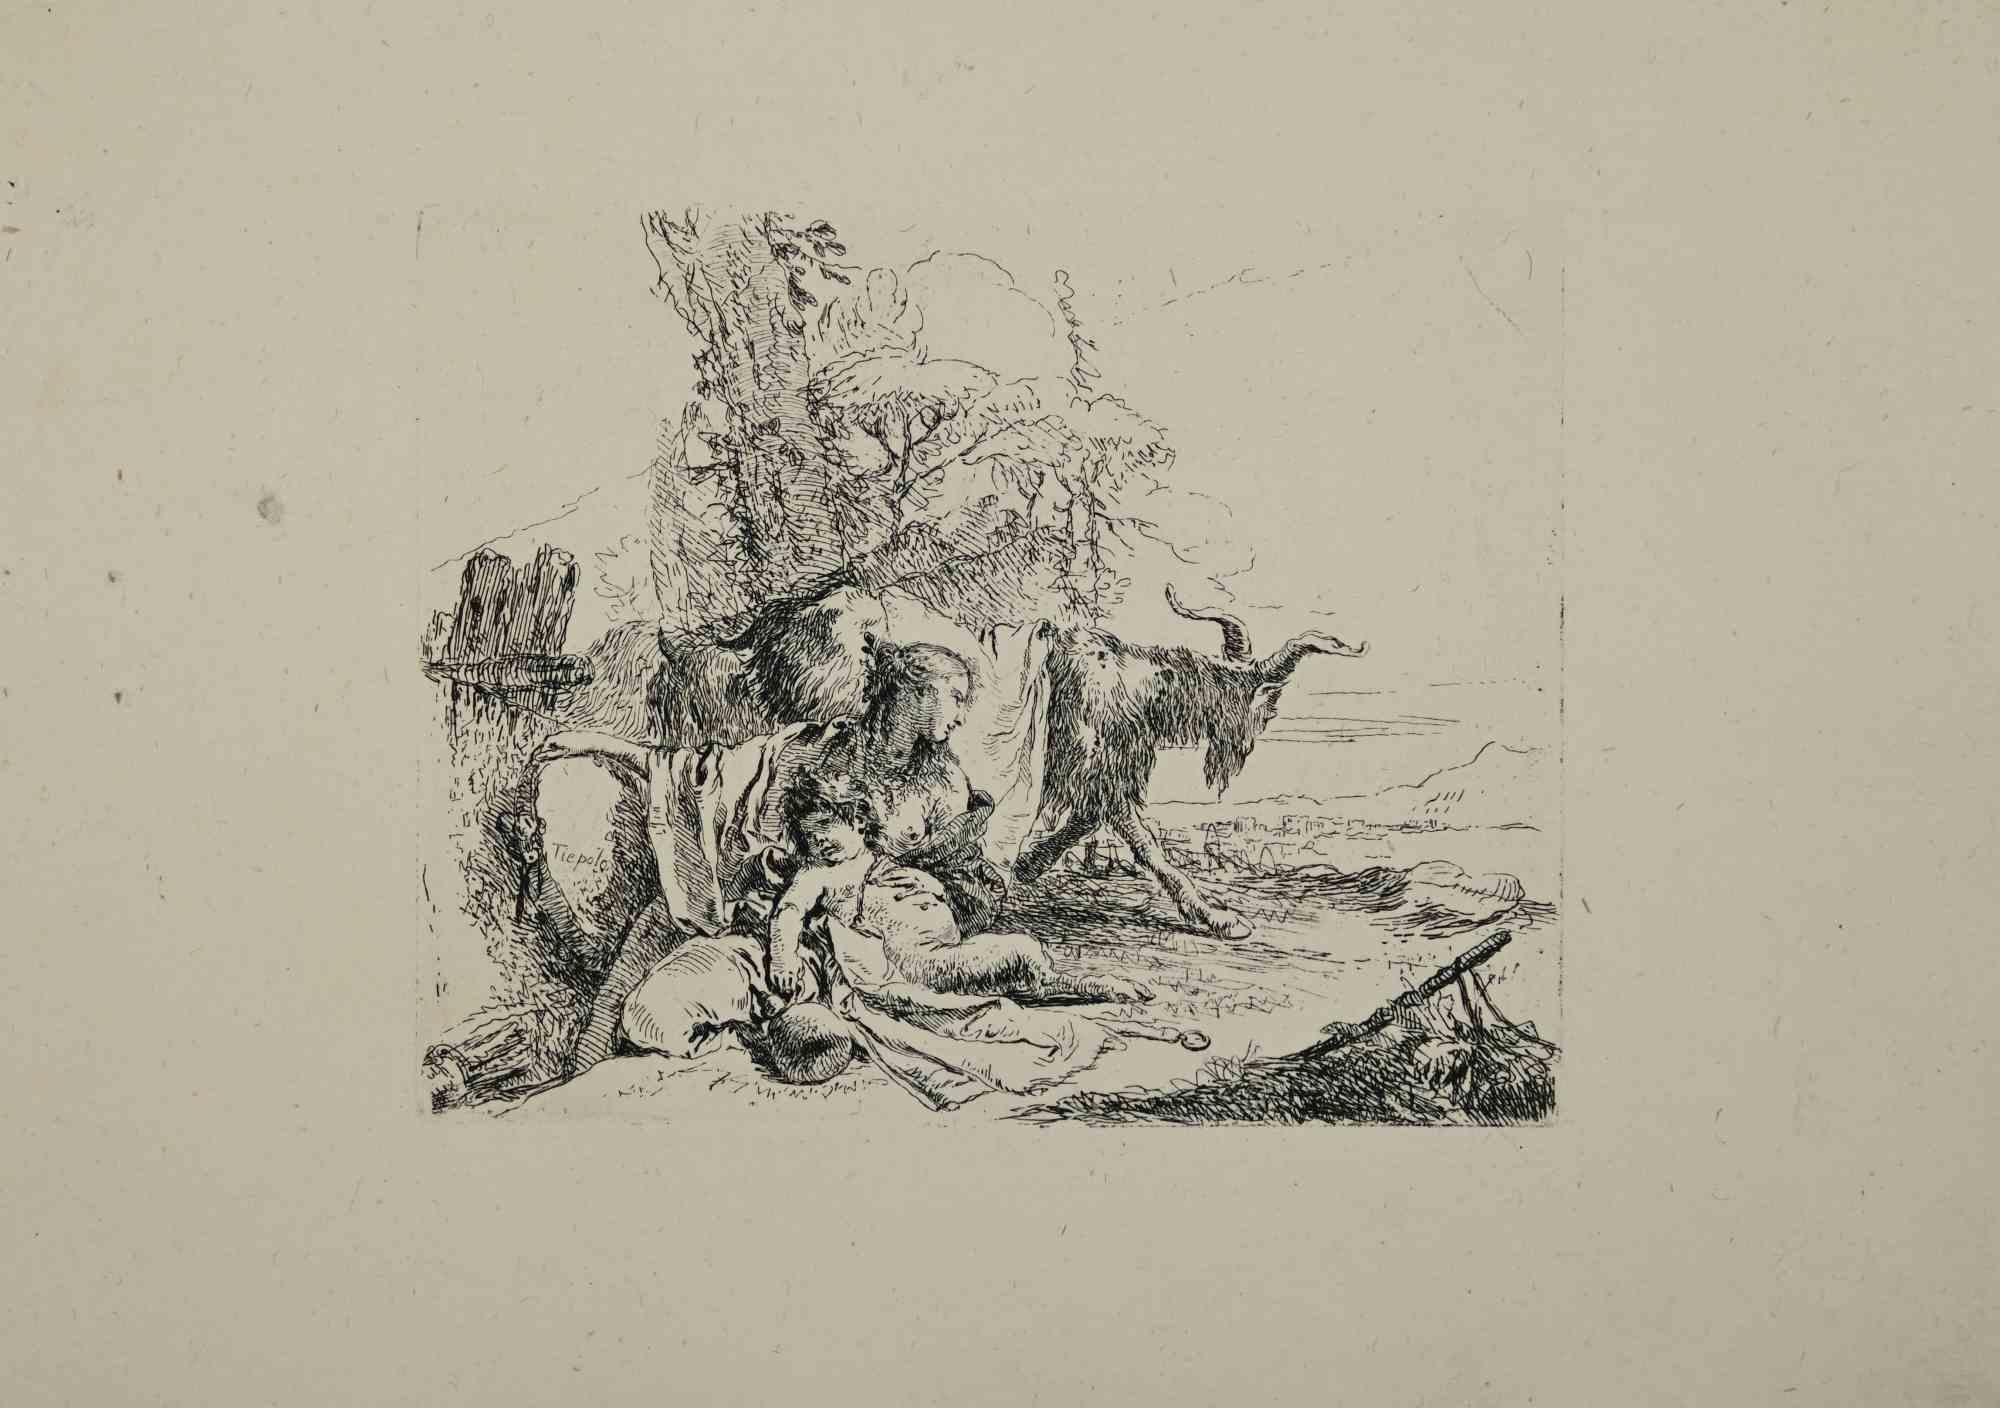 Giovanni Battista Tiepolo Figurative Print - The Nynph and the Centaur  - Etching by G.B. Tiepolo - 1785